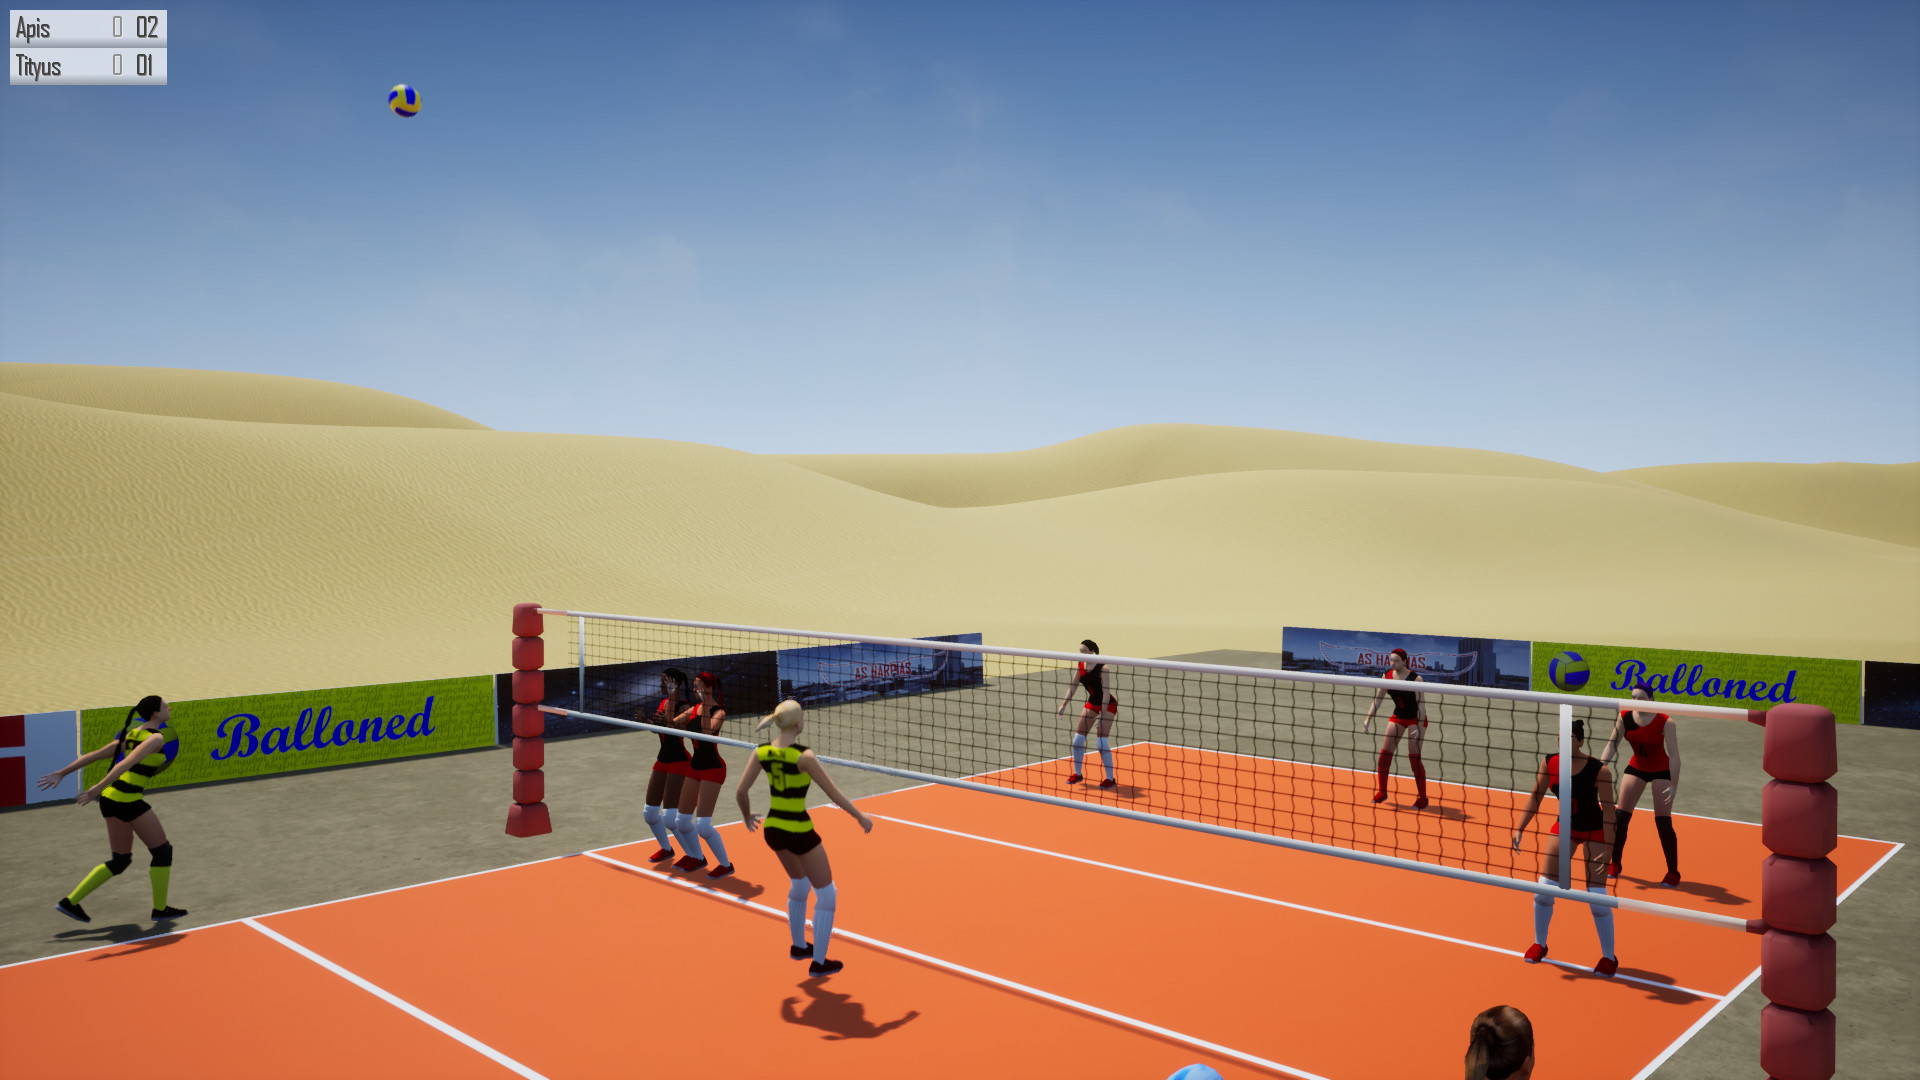 Lactea Volleyball Free Download